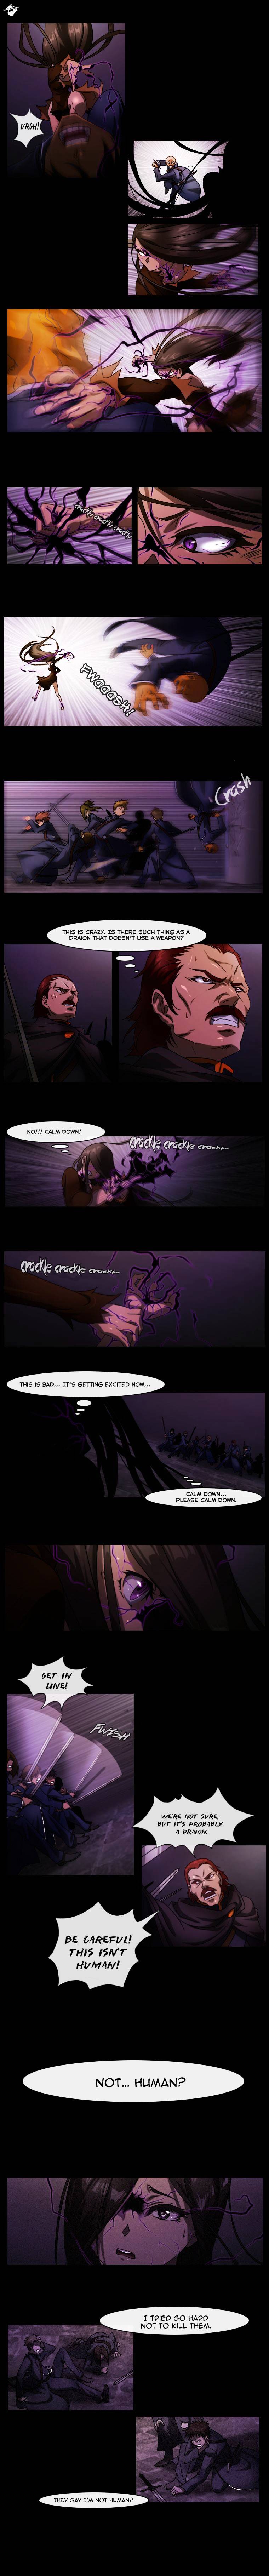 Over Steam - Page 3